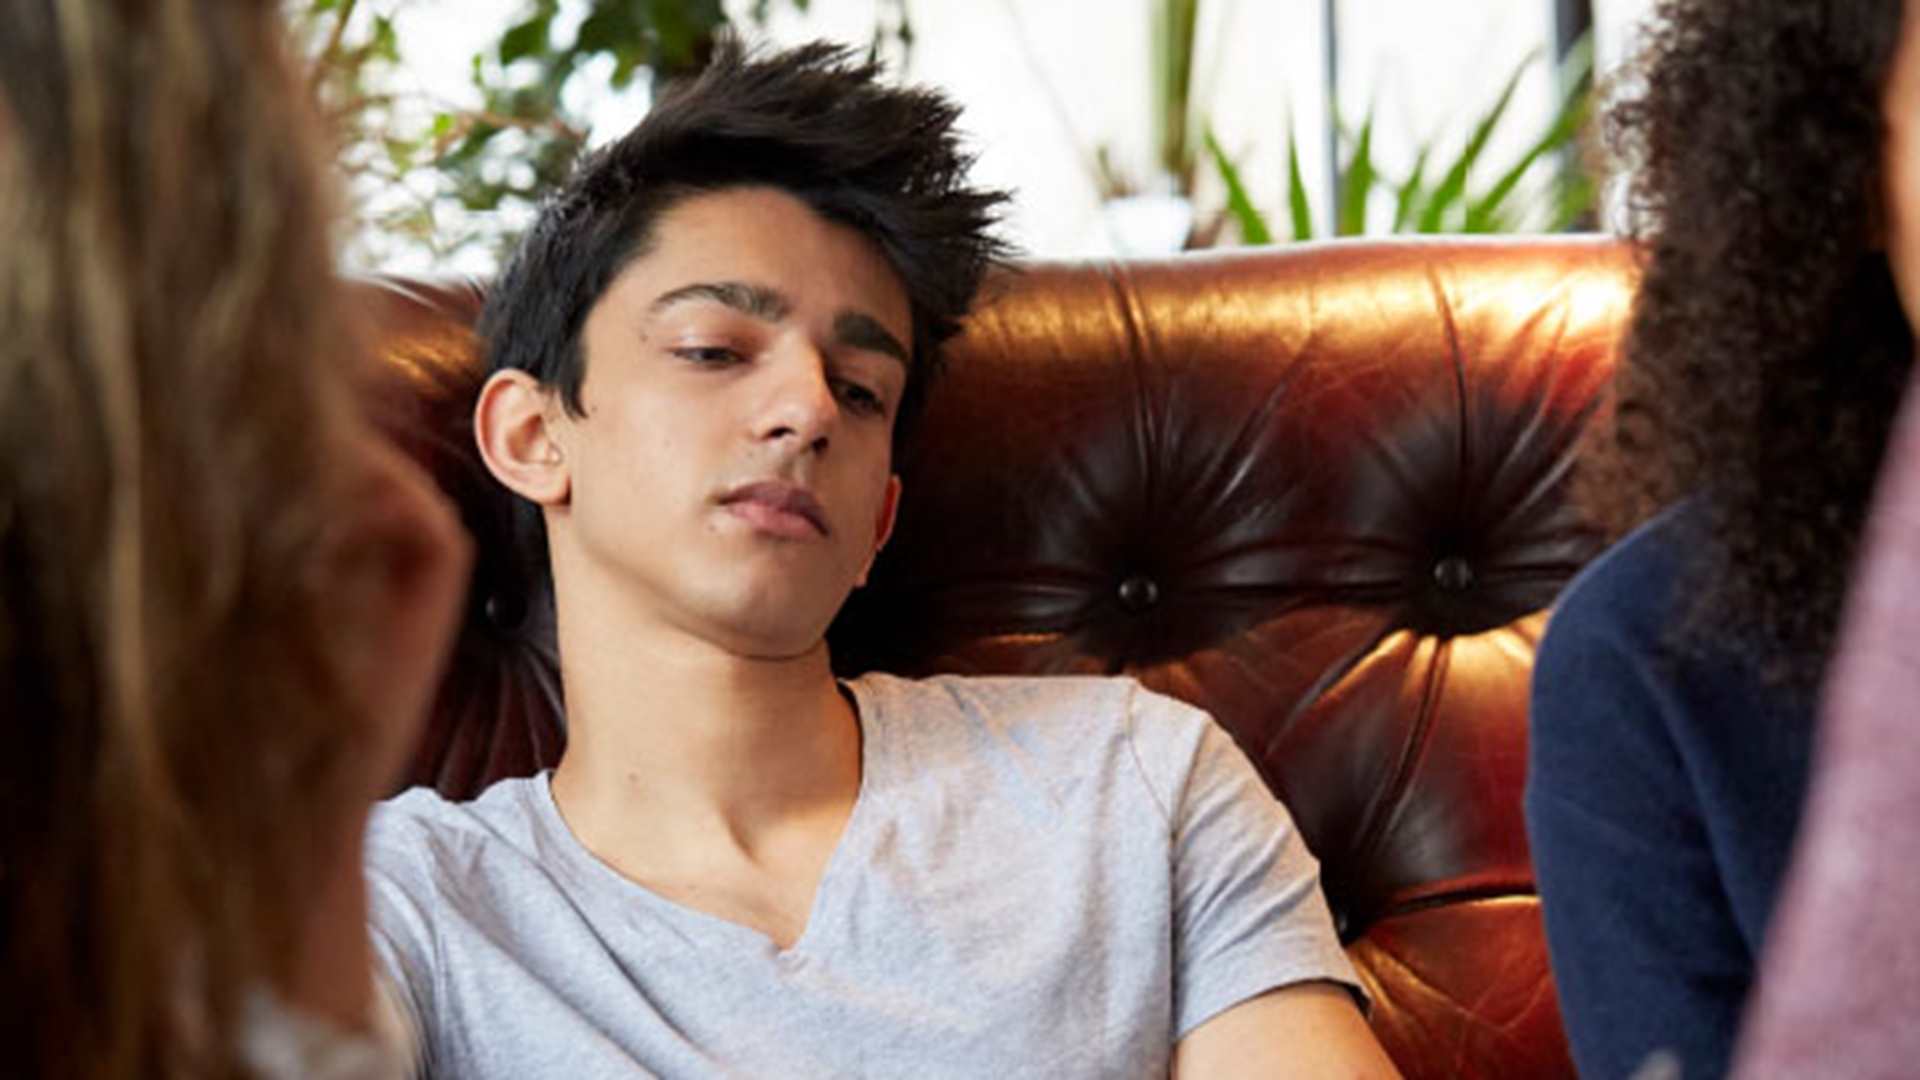 Poster titled ' Struggling with your mental health?' with a photo of a young person on a sofa looking down and not engaging with the other young people in the image.